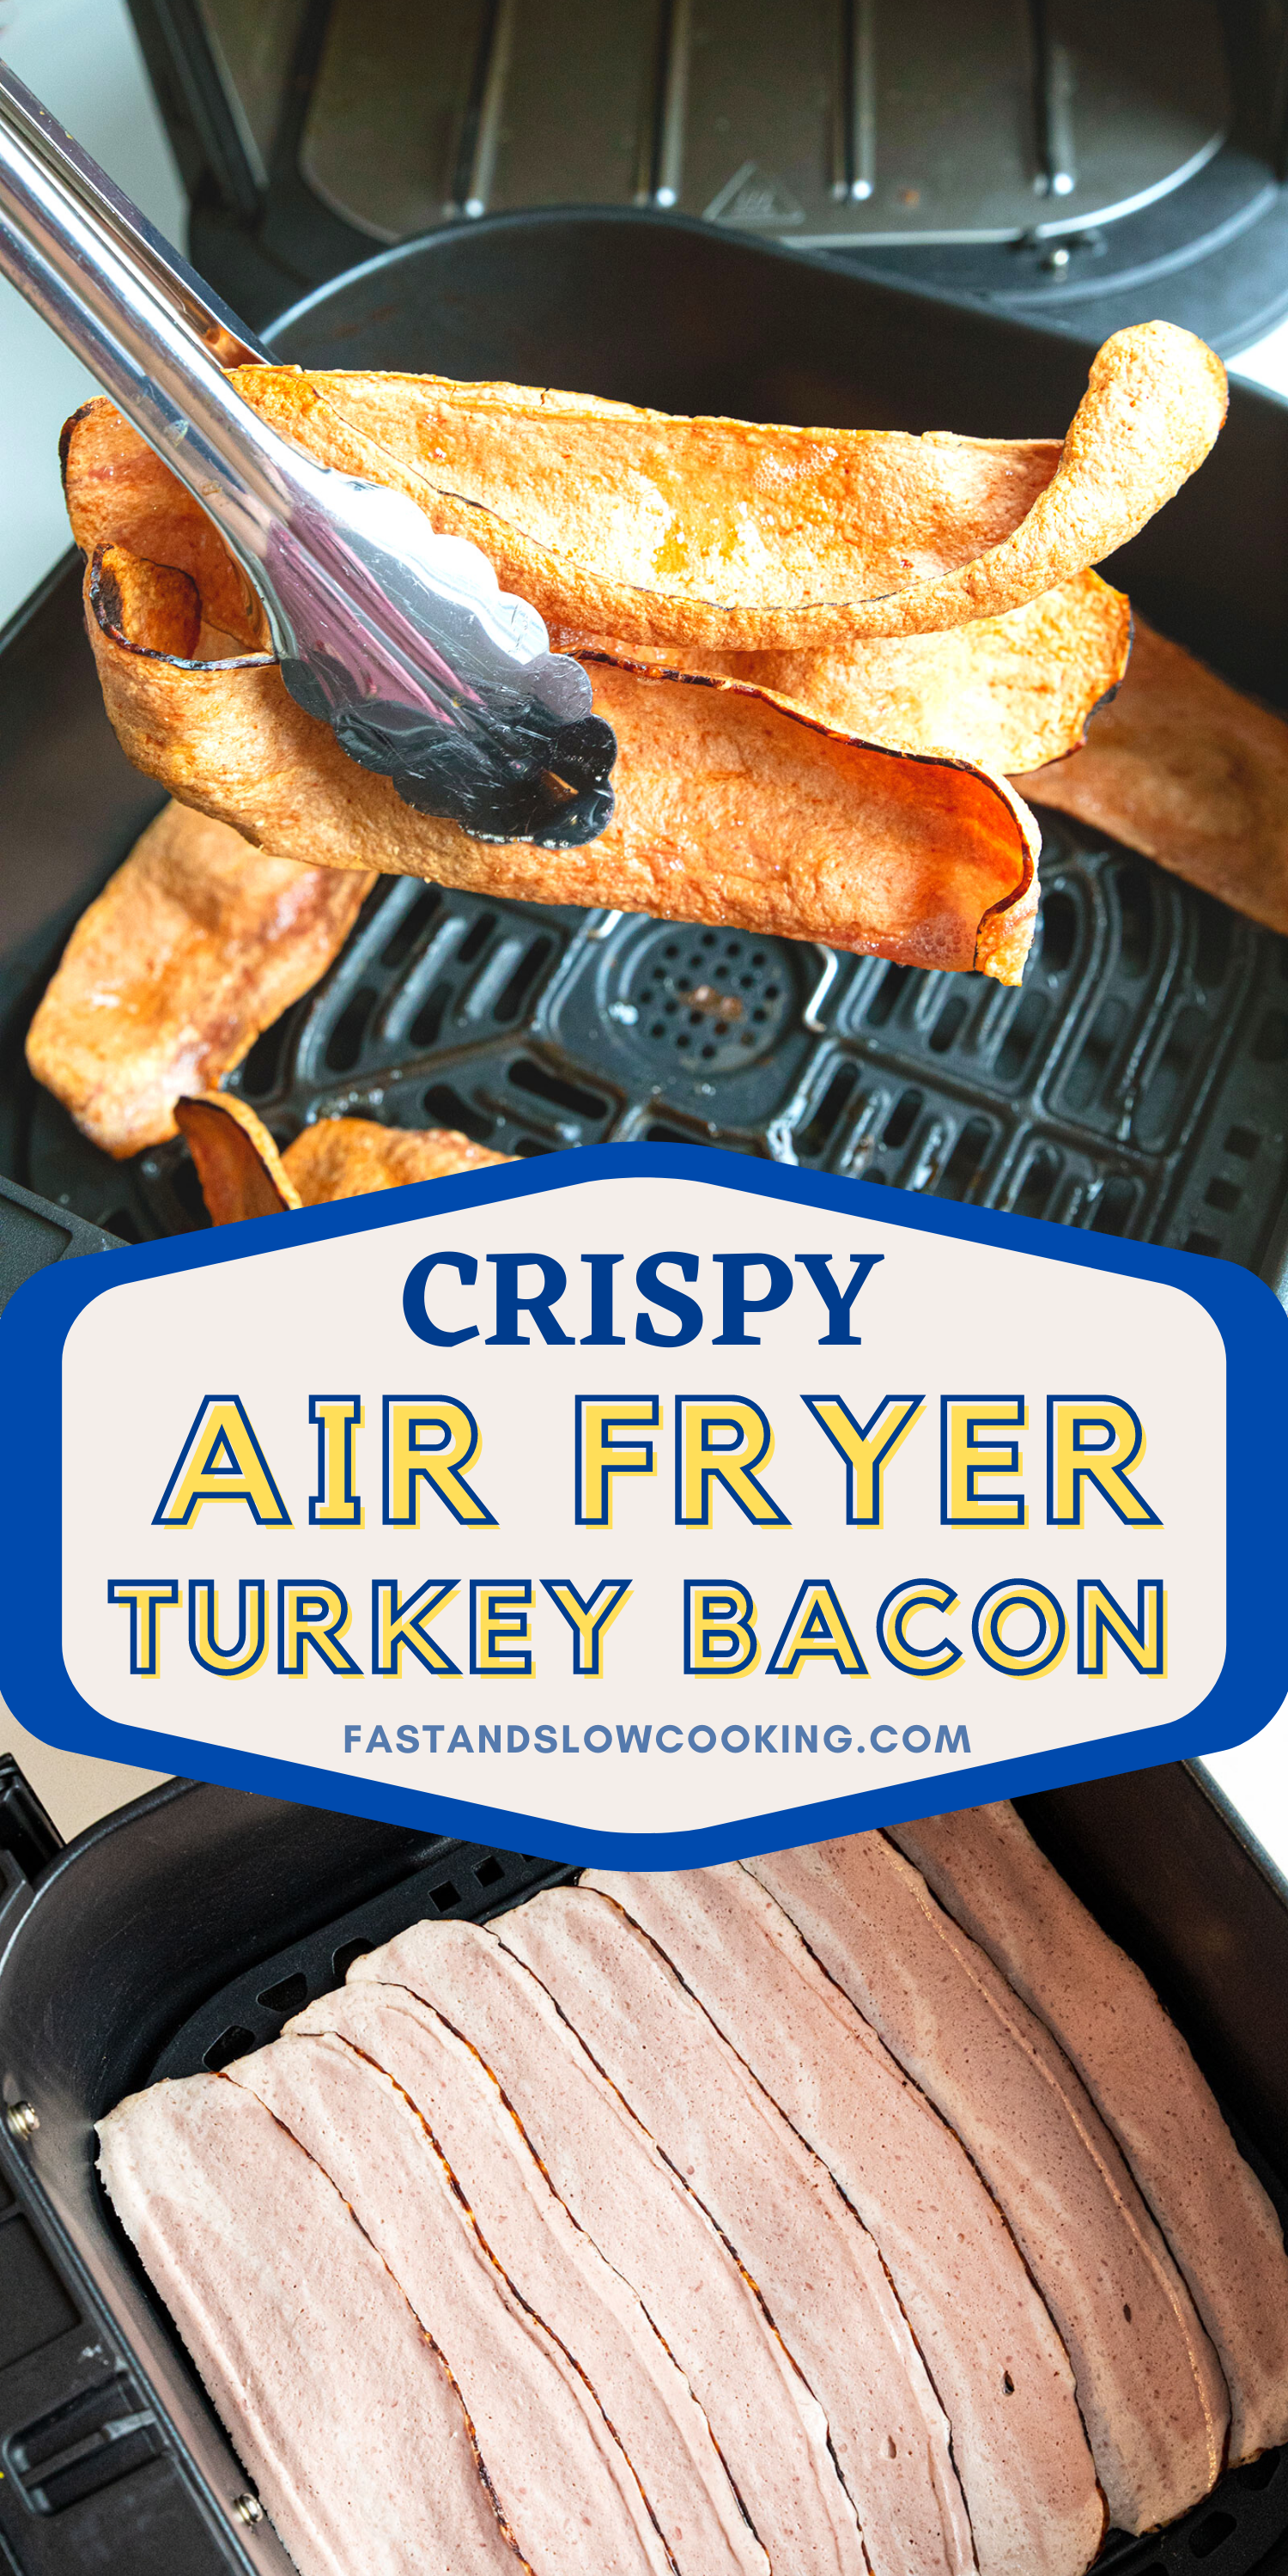 Turkey bacon done in the air fryer is the best way to make it! Fast and easy, this might just convert you into being a turkey bacon lover!